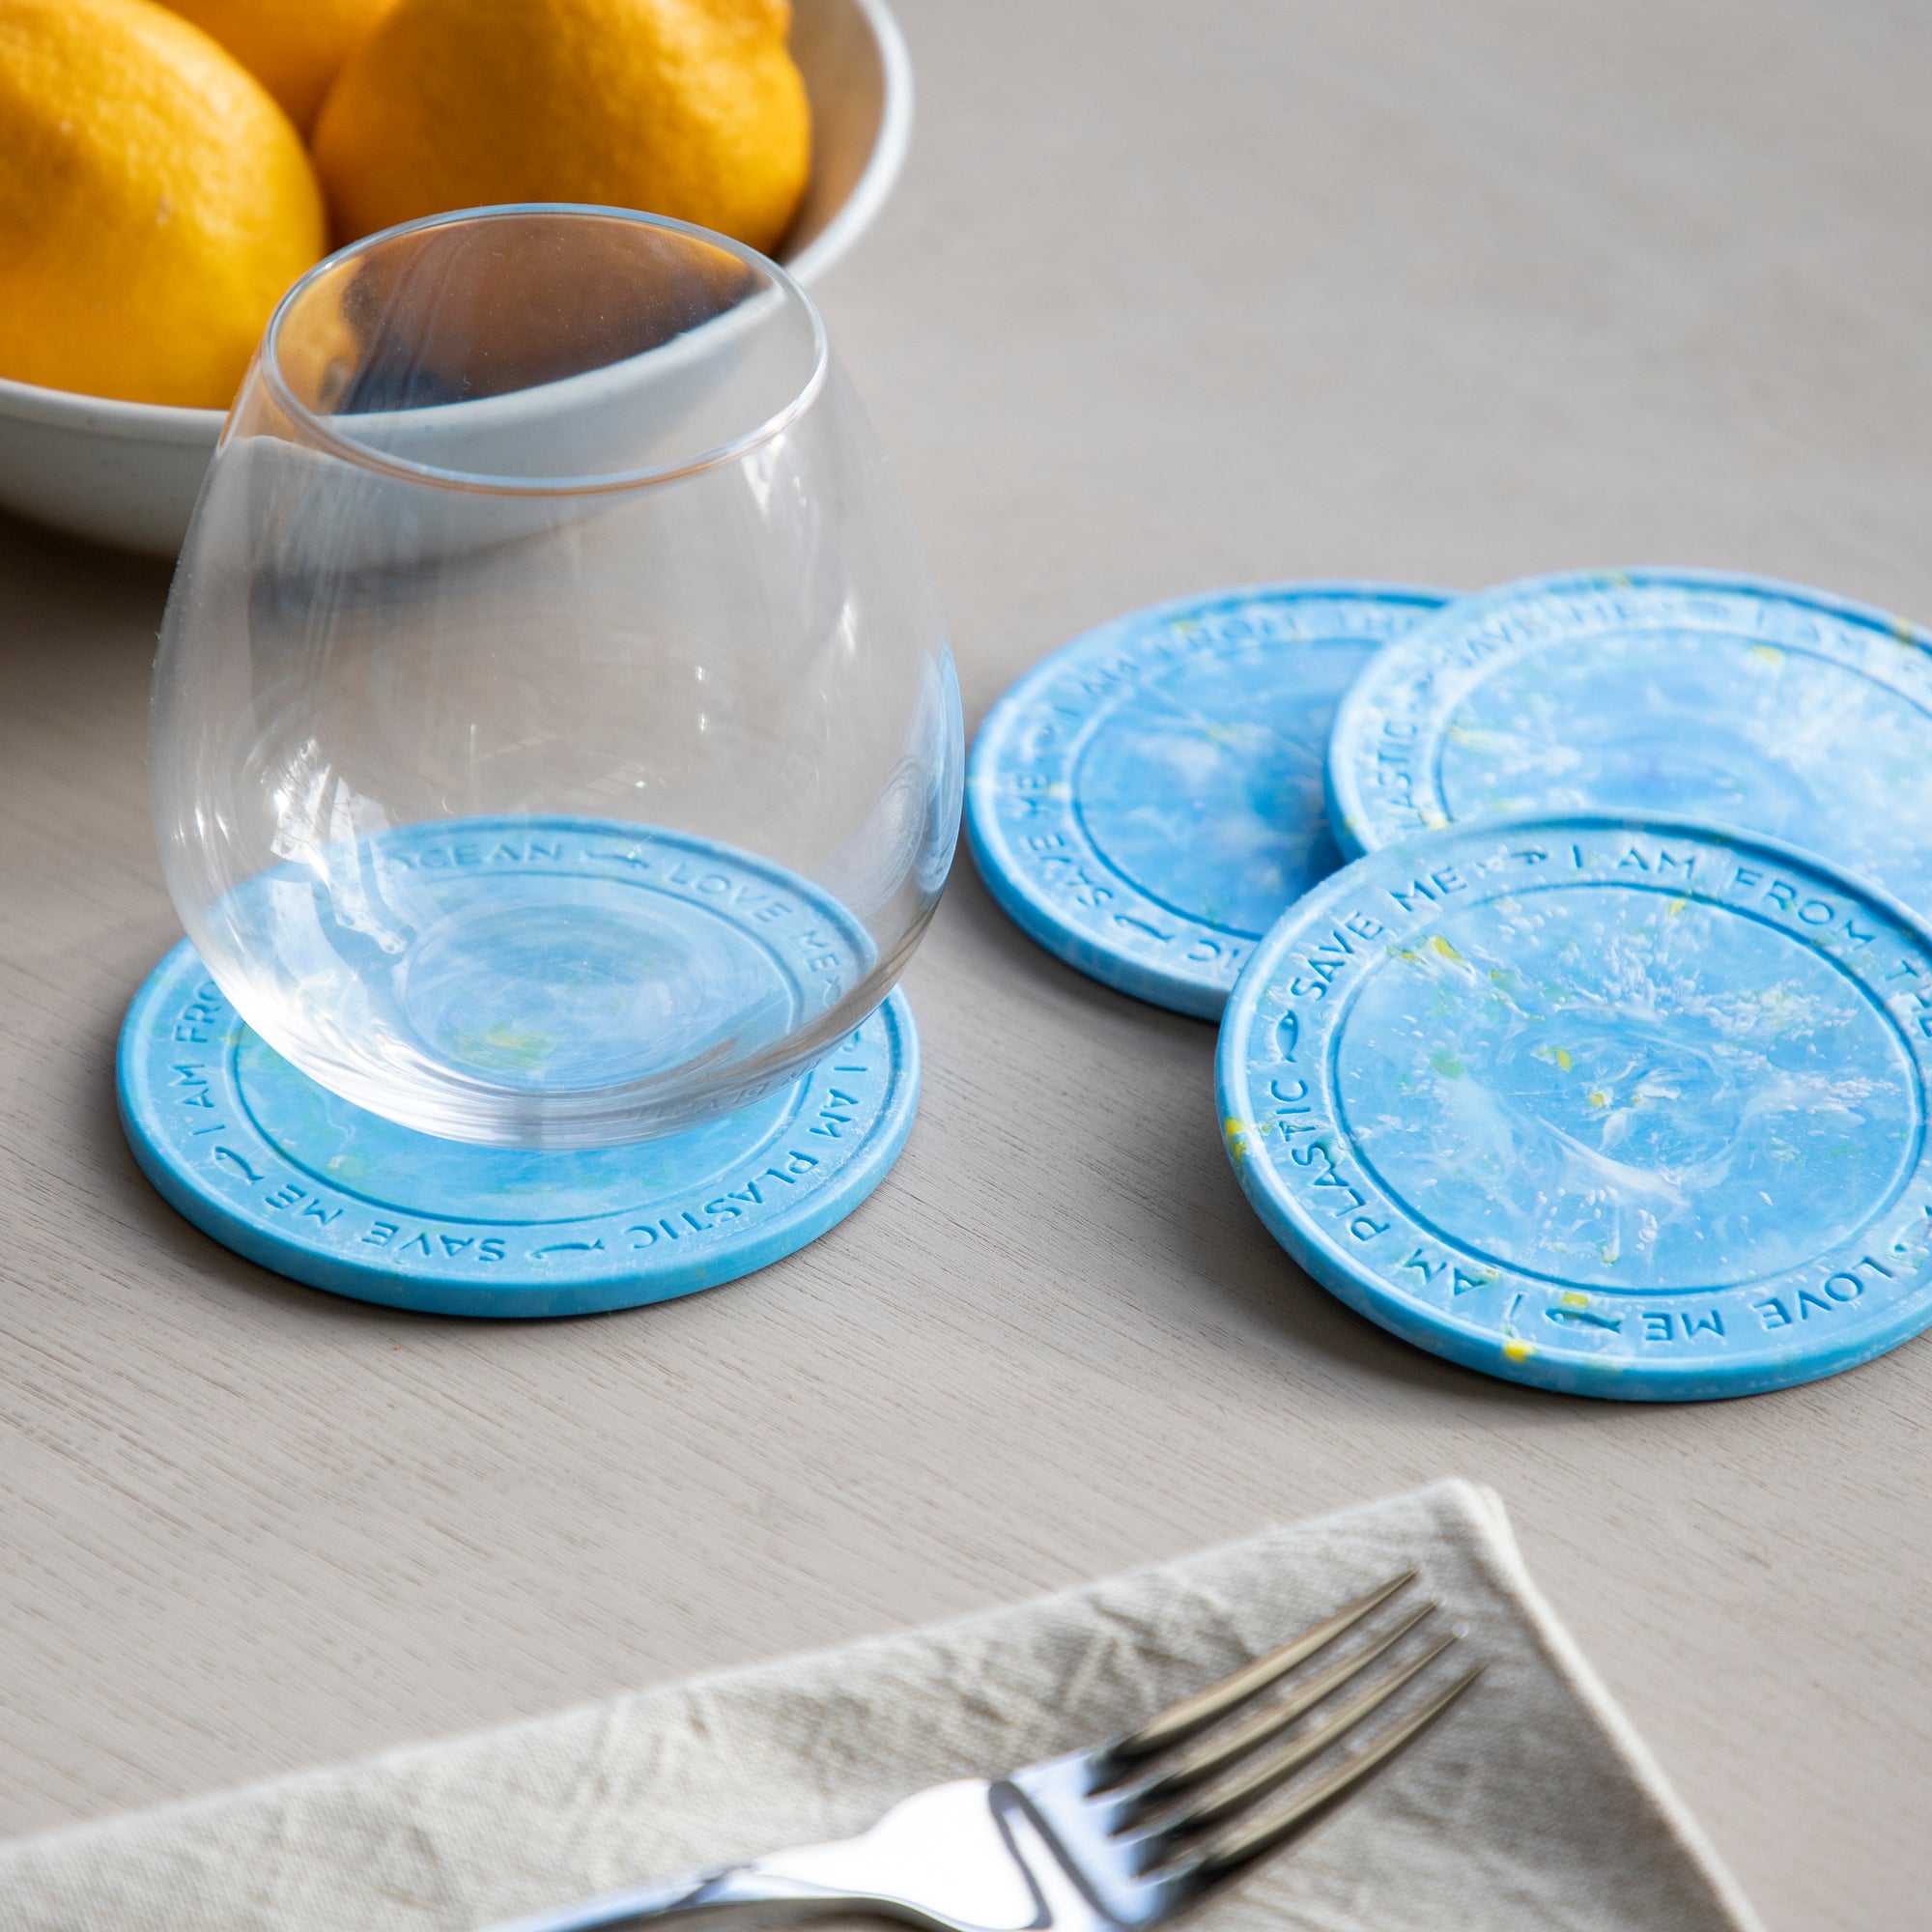 Introducing Our New Recycled Ocean Plastic Coasters